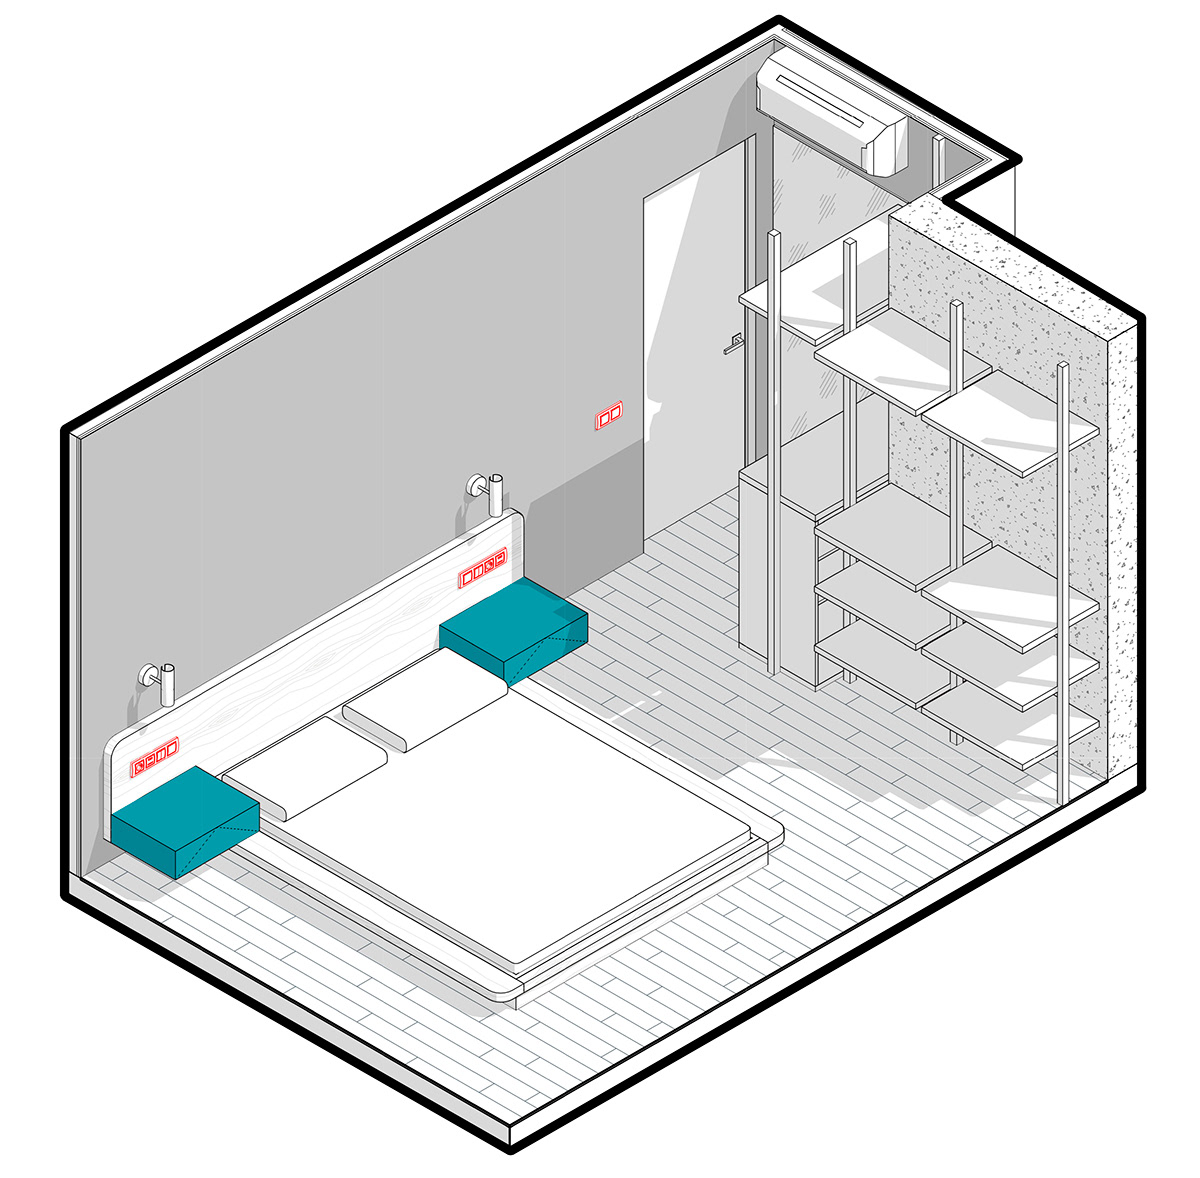 The 3D layout of the bedroom